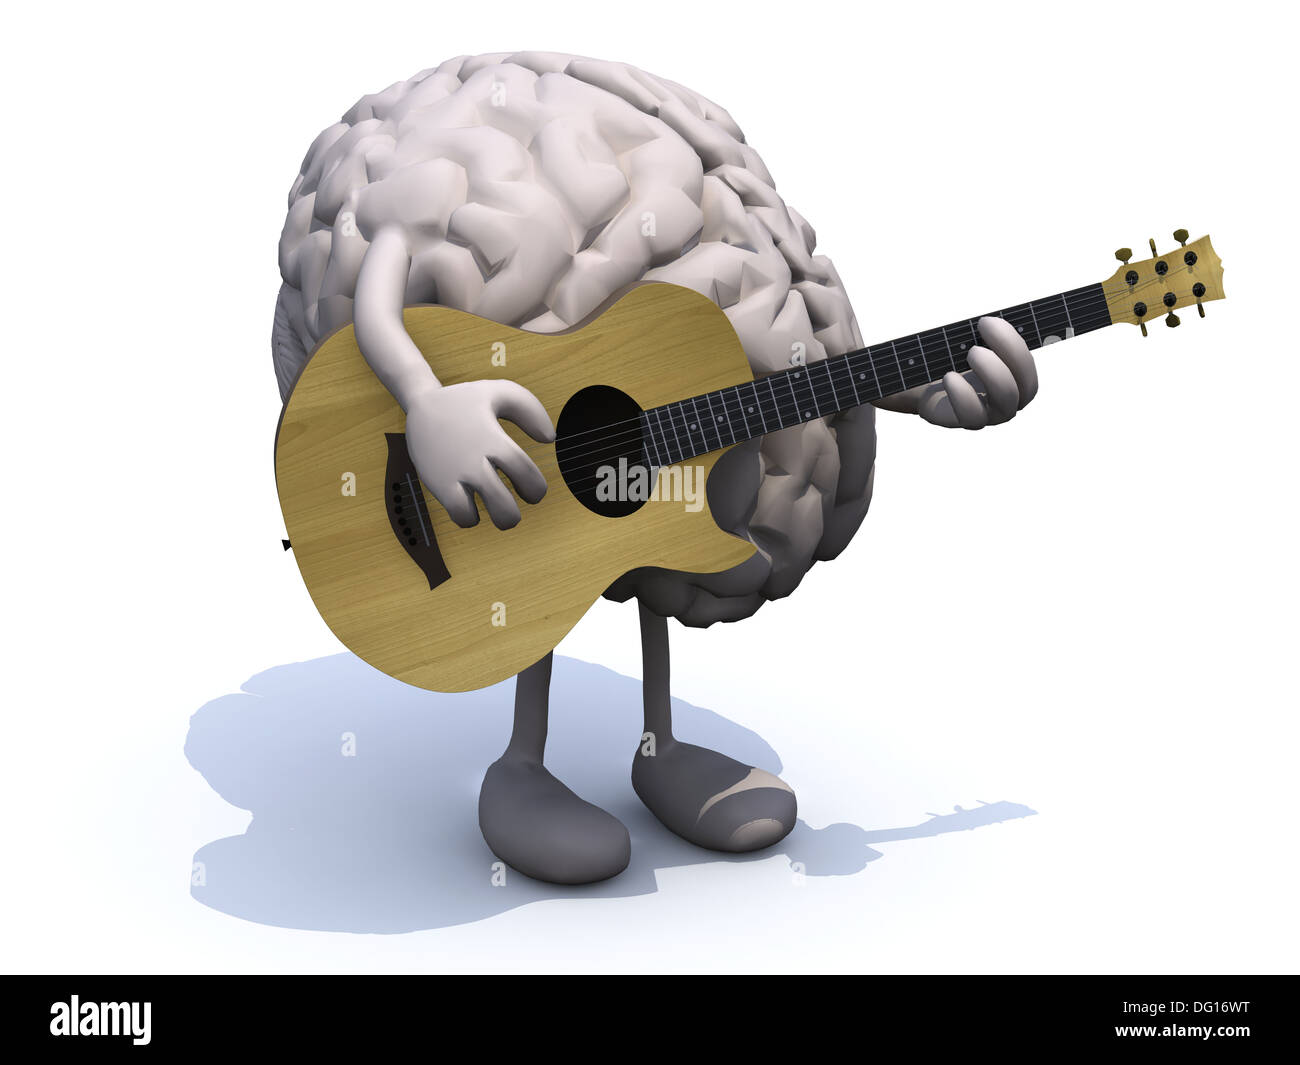 human brain with arms and legs playing a guitar, learning music concepts. Stock Photo